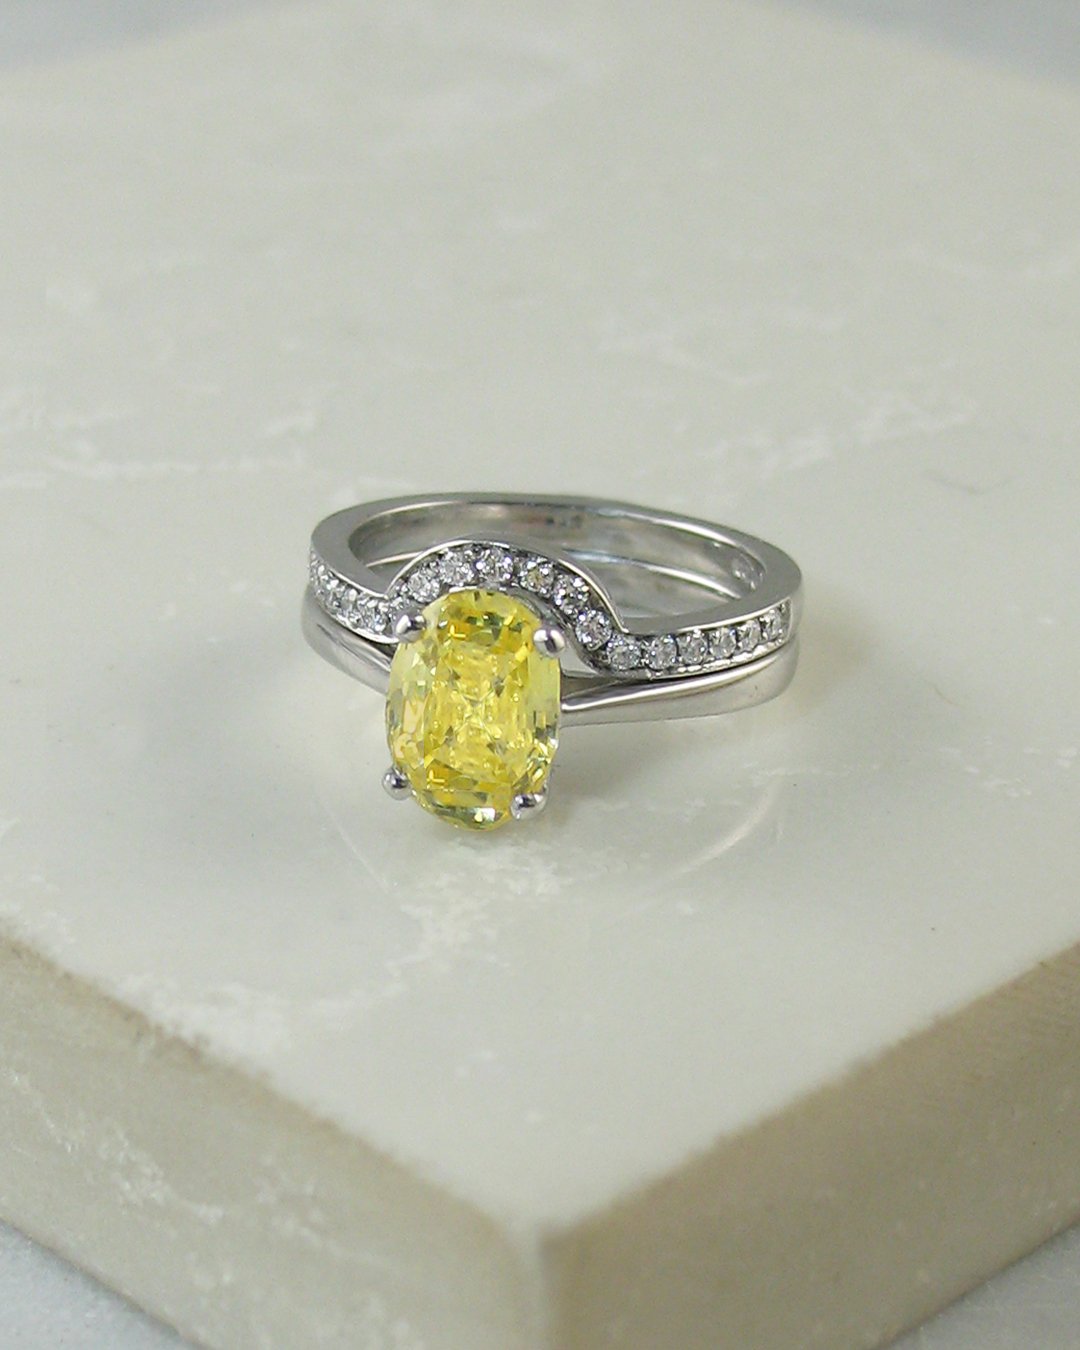 A yellow sapphire engagement ring with fitted diamond eternity ring